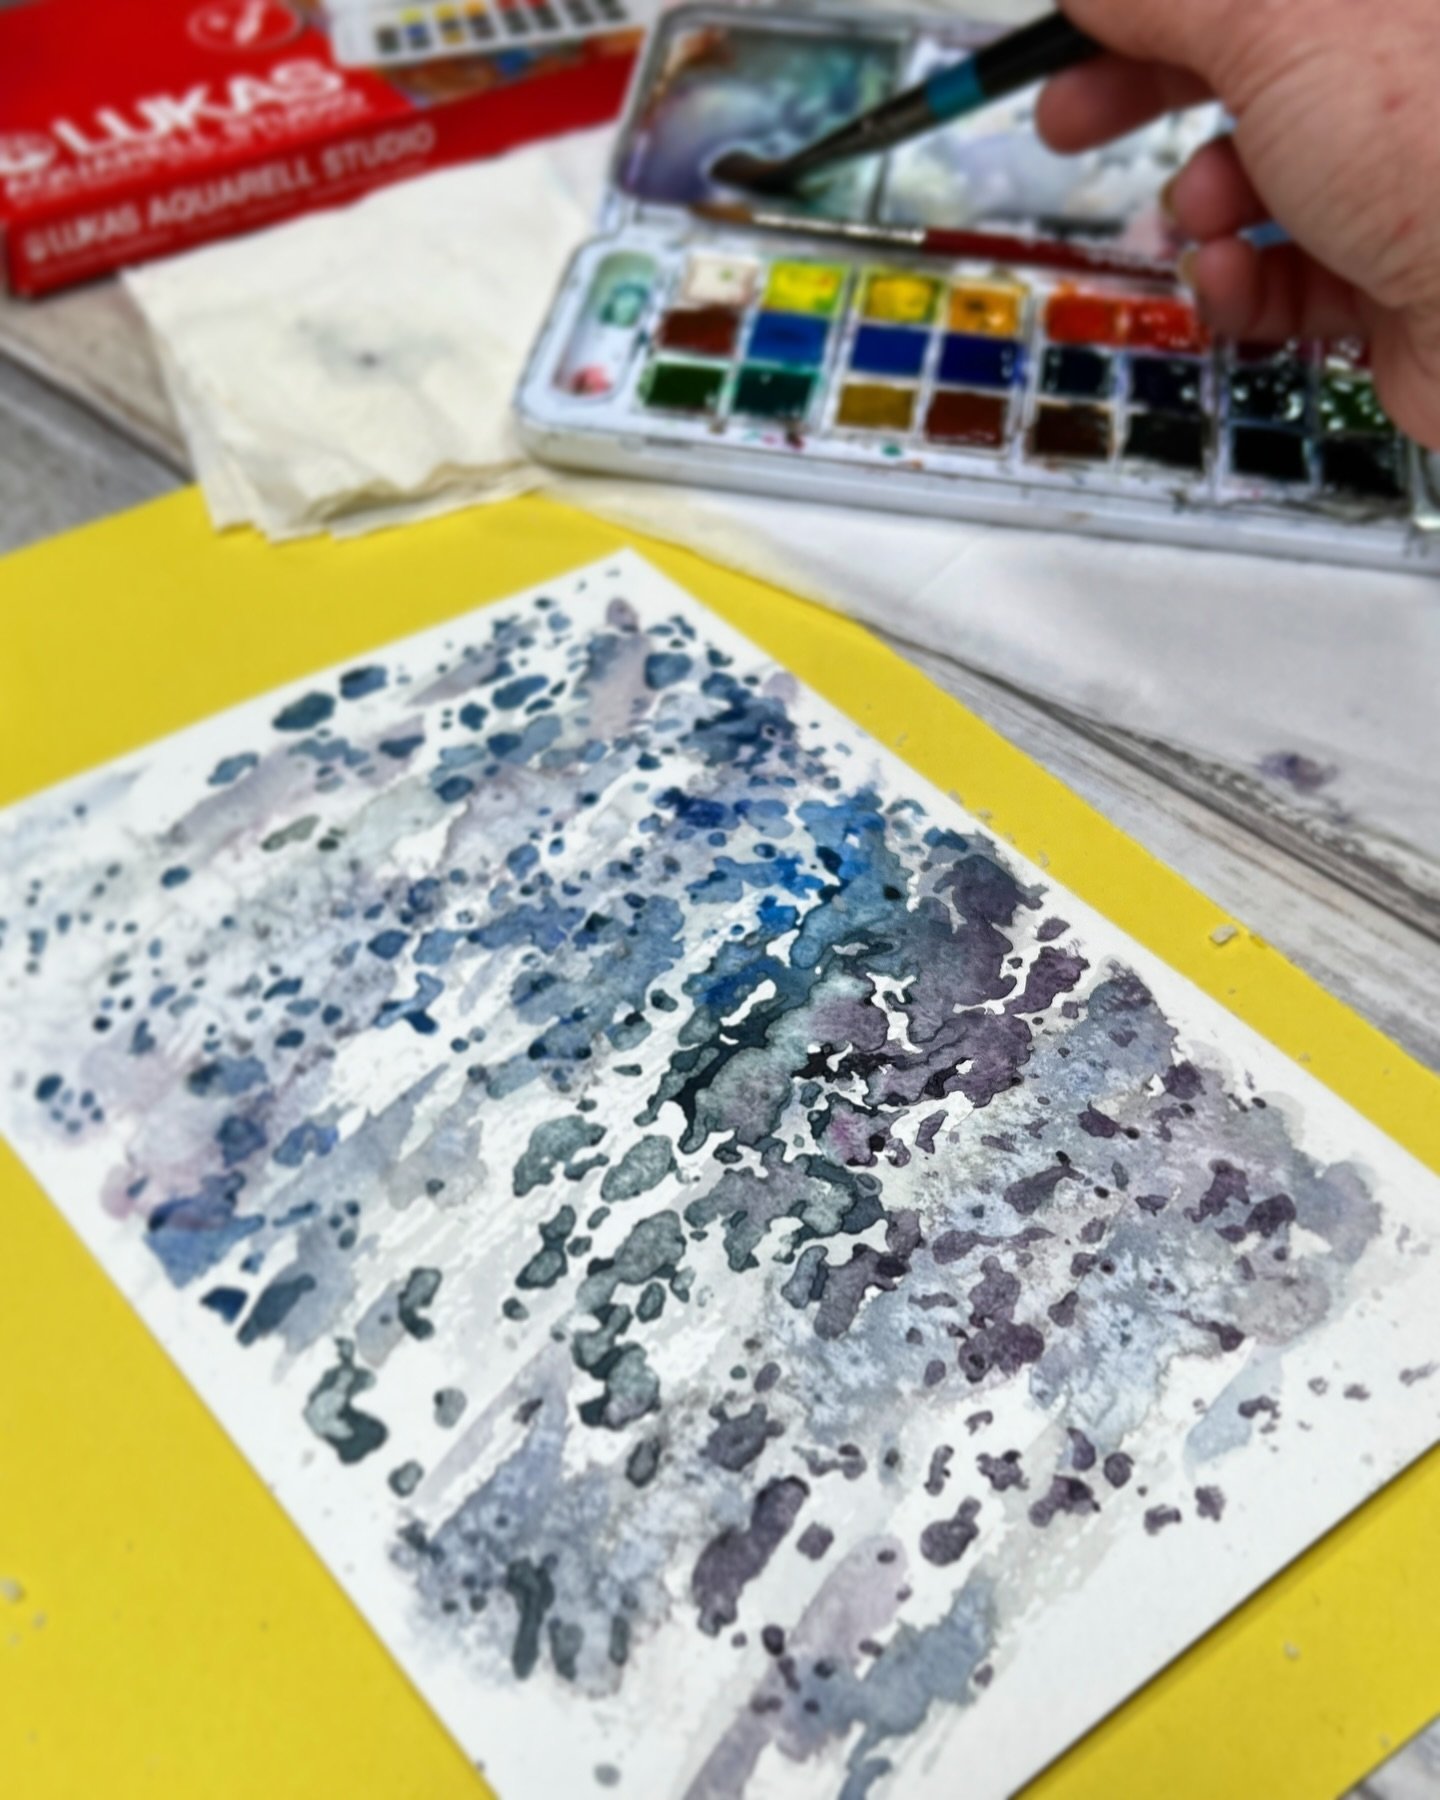 For various reasons, I haven&rsquo;t been sleeping well for weeks and it&rsquo;s catching up with me. Decided to take some time to play with abstract water-like textures on a scrap of random paper in watercolour to help me feel calm. The to-do list w